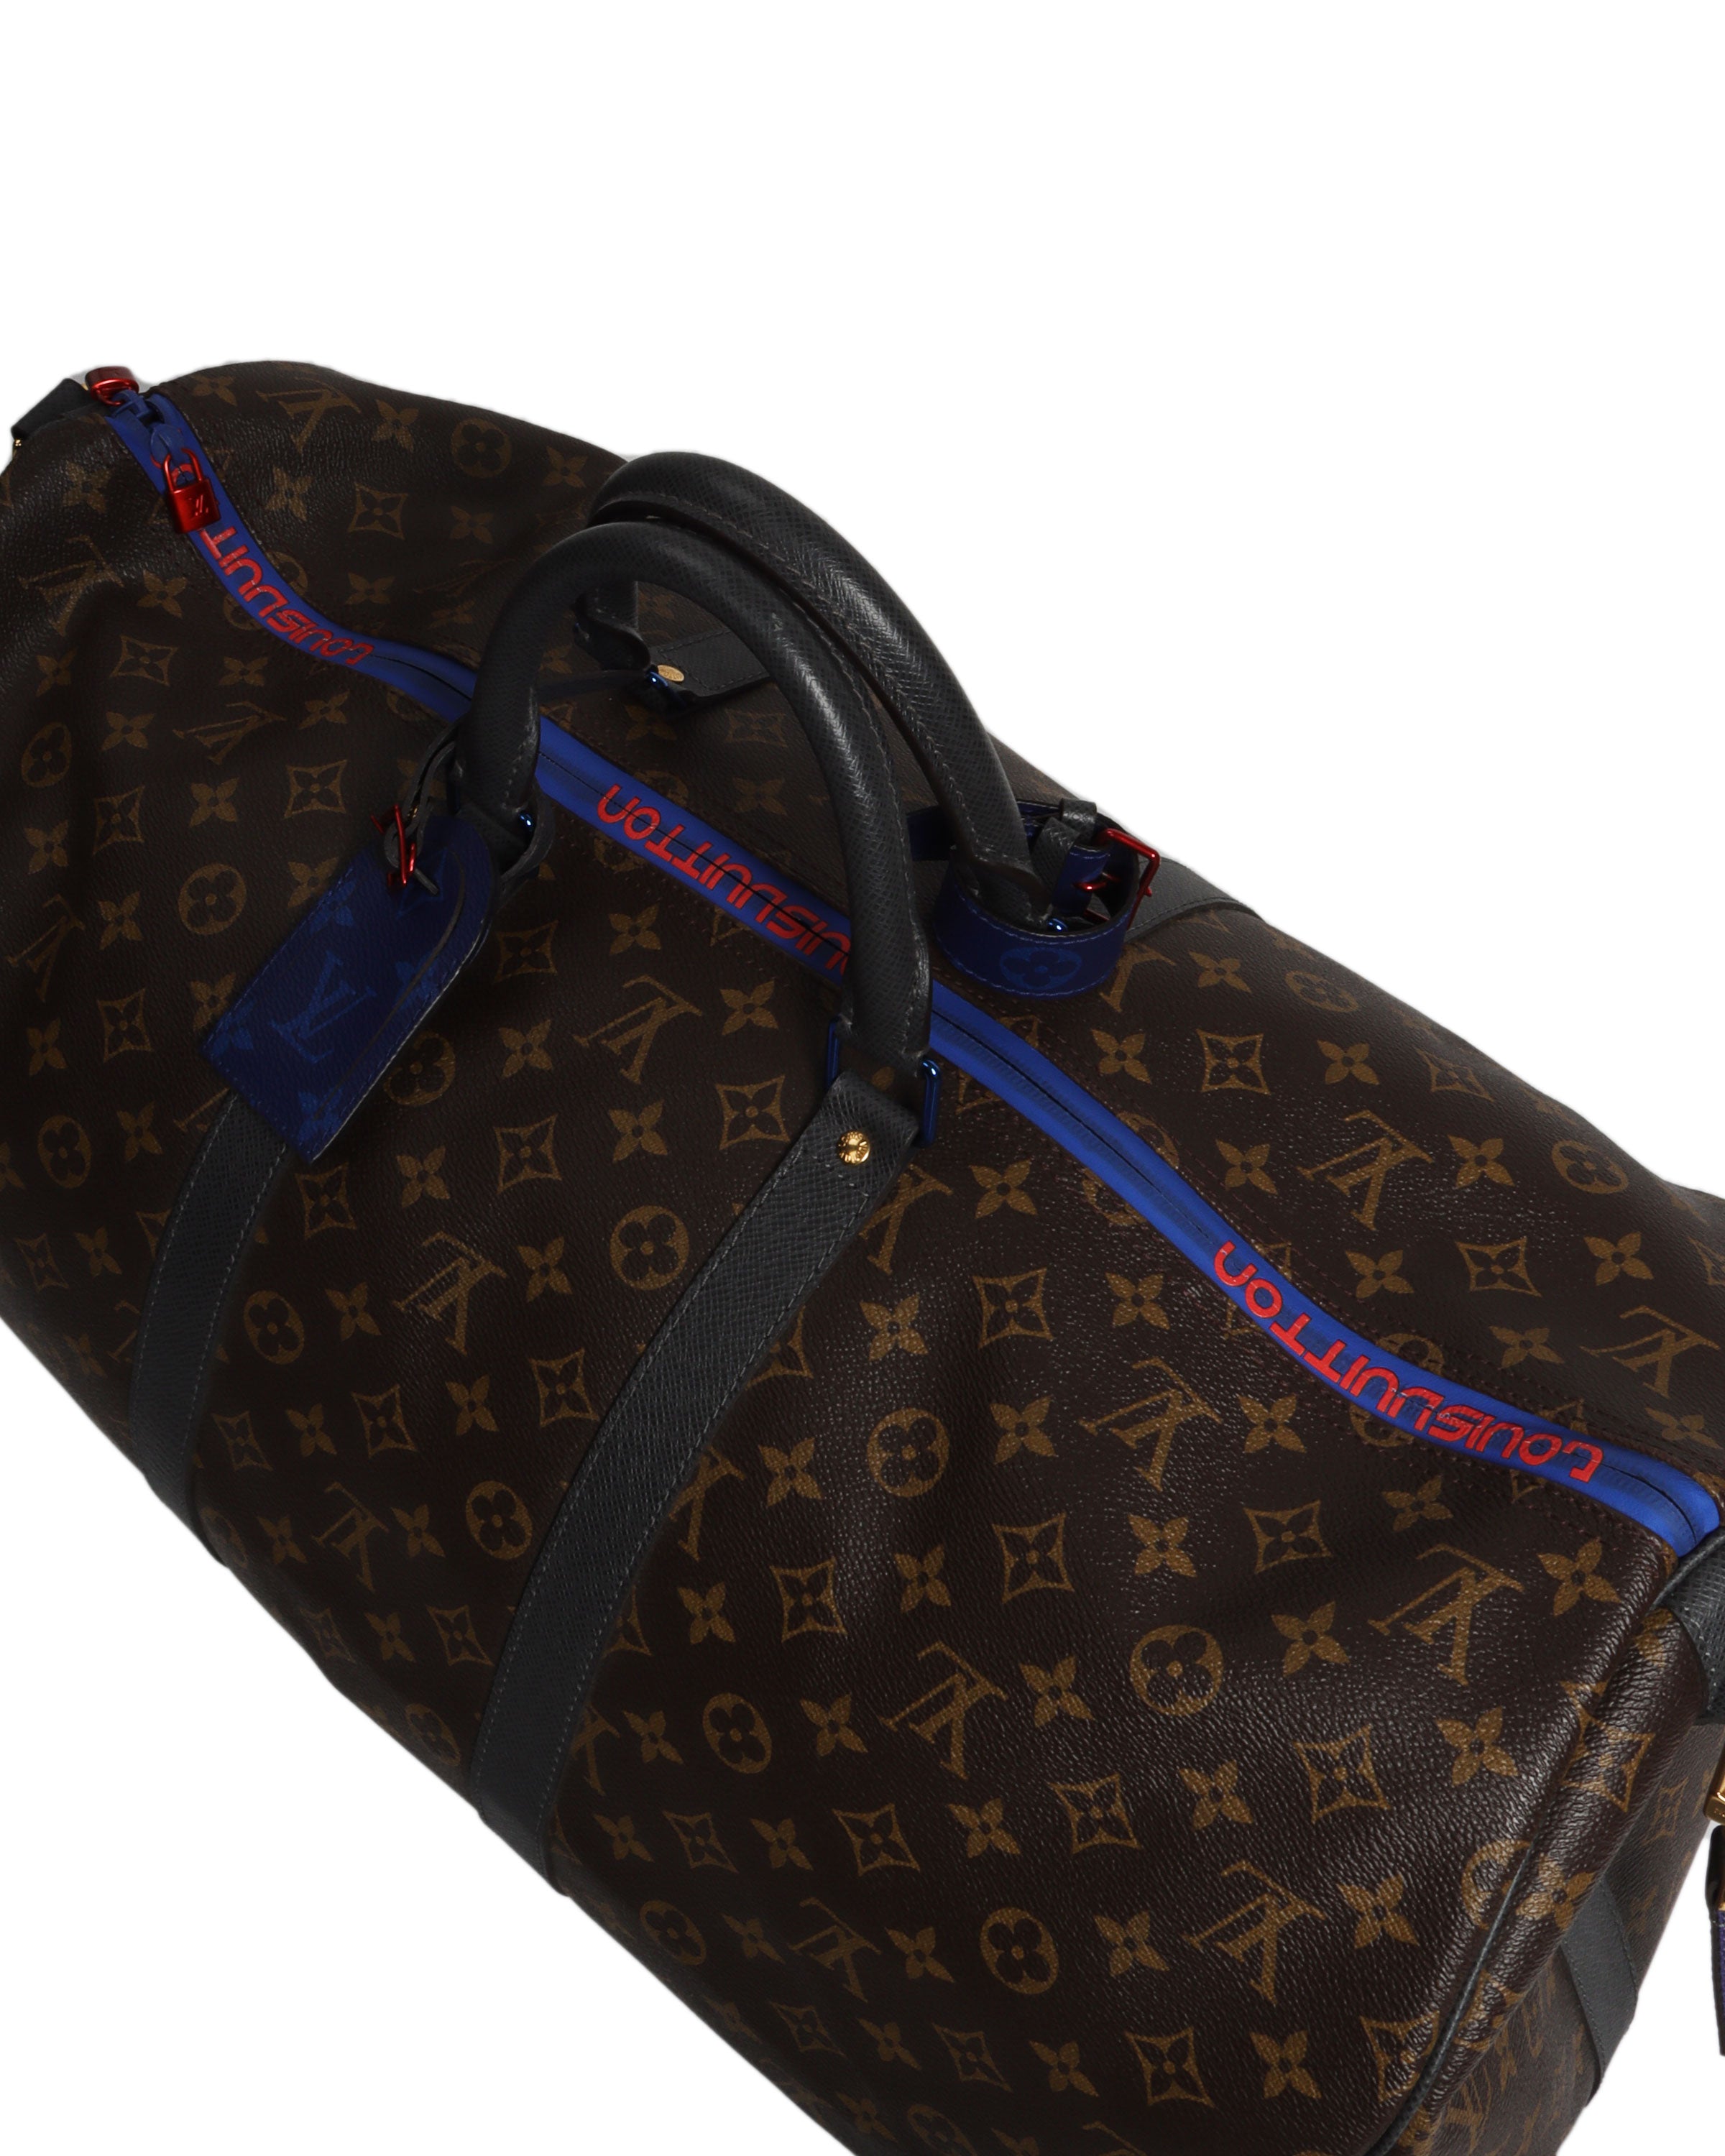 Louis Vuitton Terry Cloth Bags For Menthol